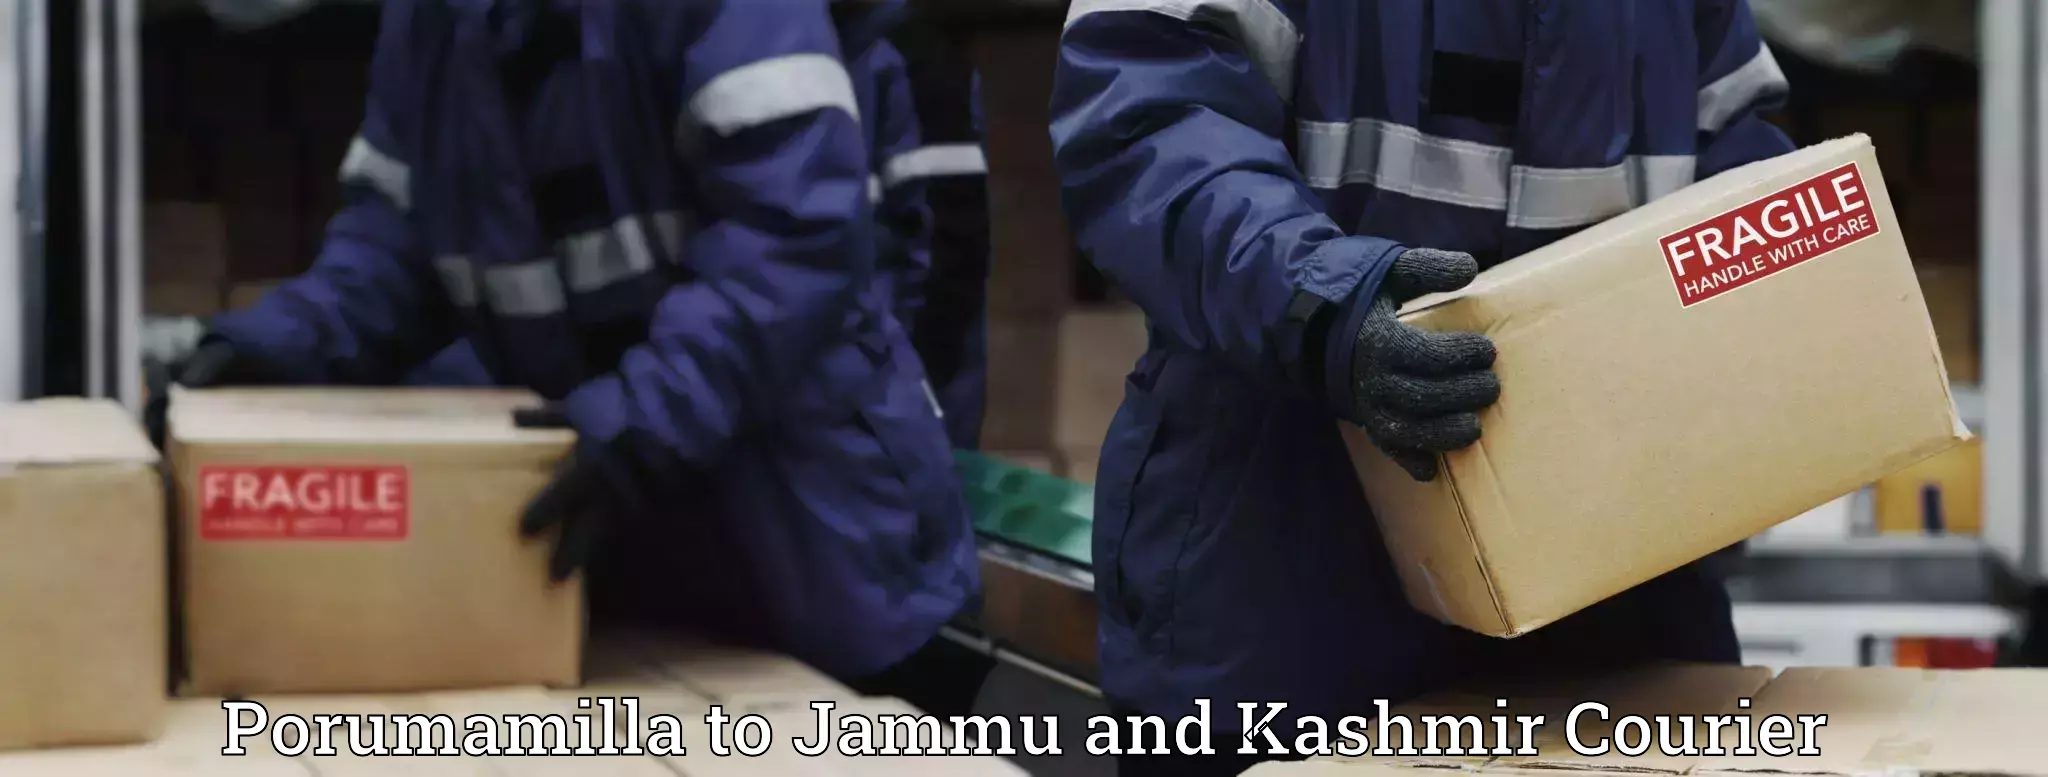 Express delivery capabilities Porumamilla to Jammu and Kashmir